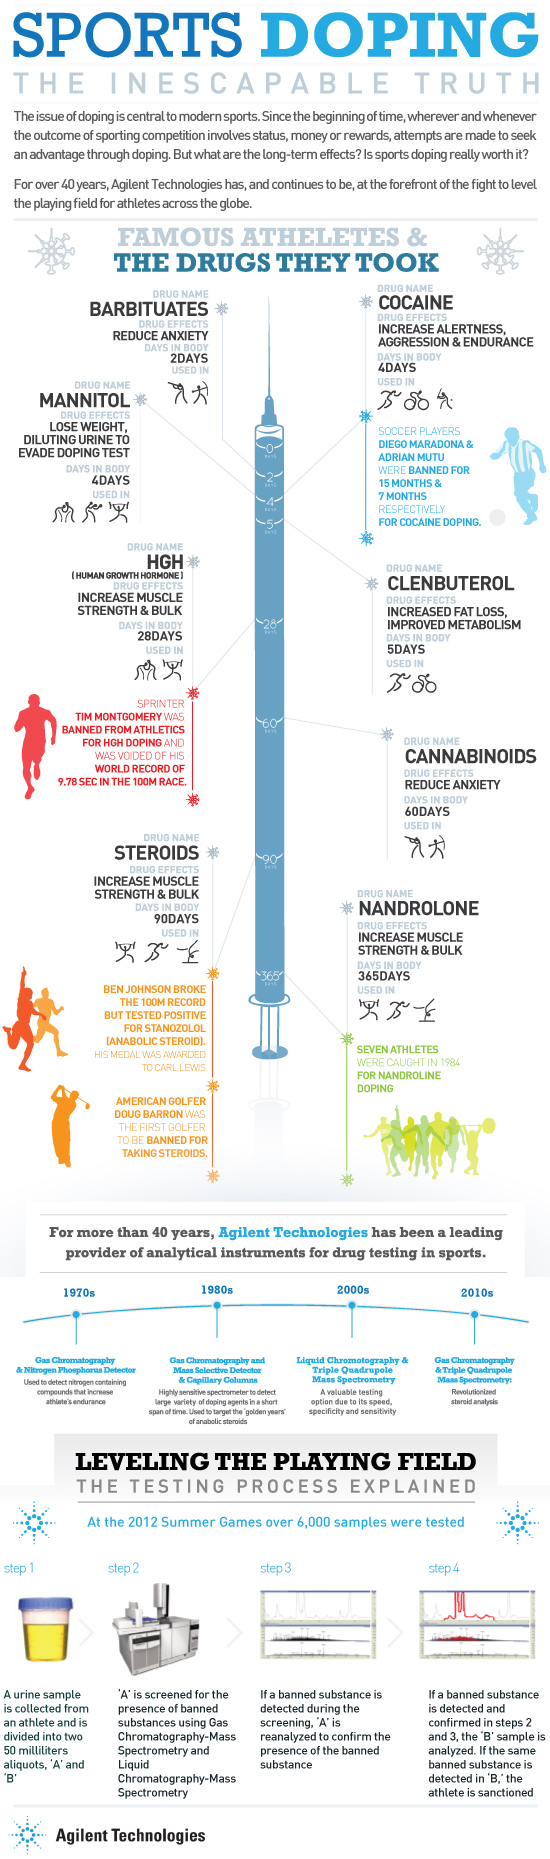 Performance Enhancing Sports Doping Drugs and Facts